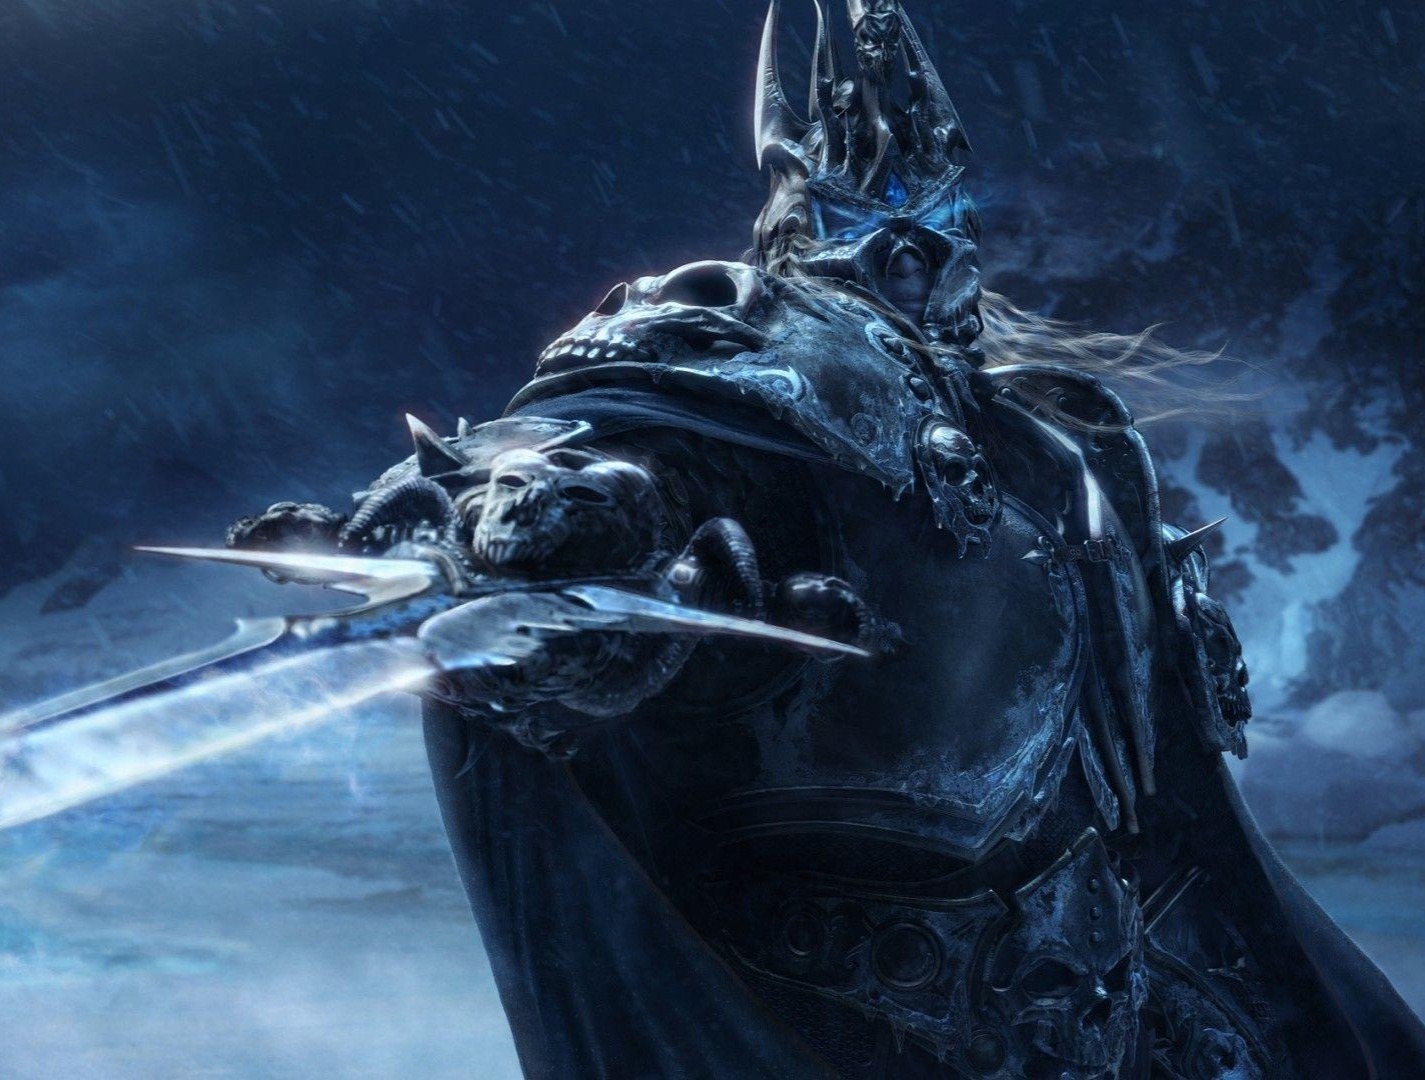 World of Warcraft: Wrath of the Lich King Classic - Northrend Heroic Upgrade bg